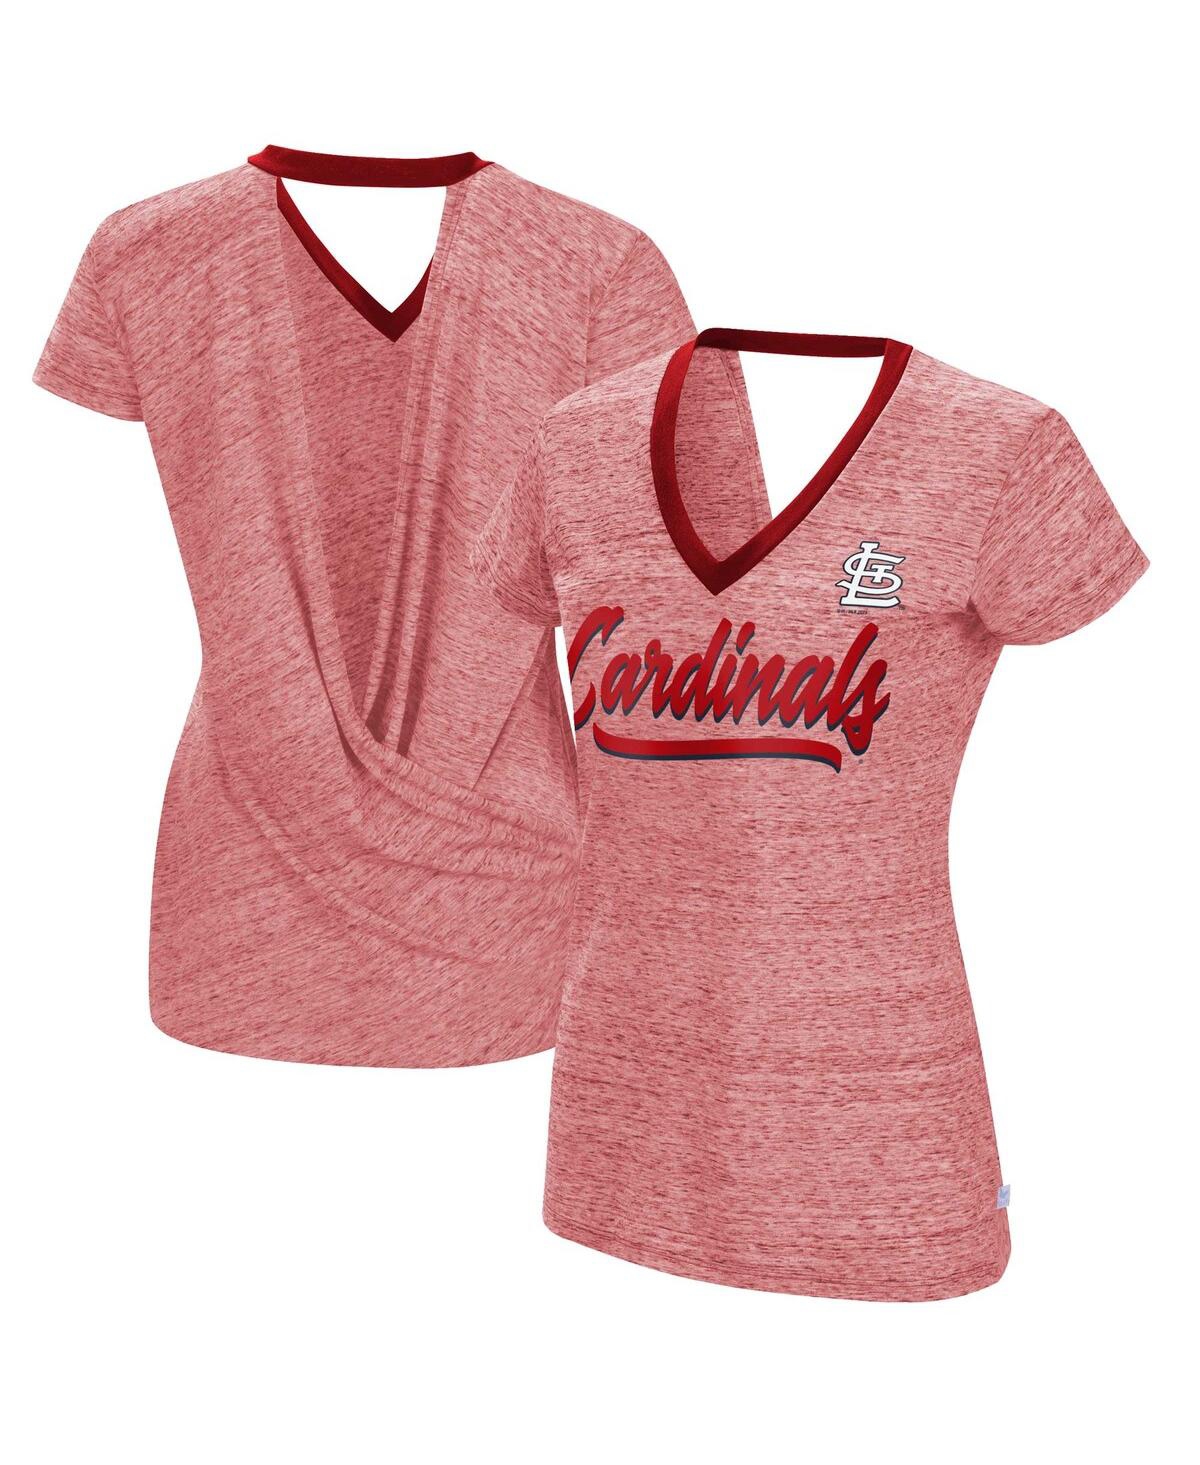 Women's Touch Red St. Louis Cardinals Halftime Back Wrap Top V-Neck T-shirt - Red